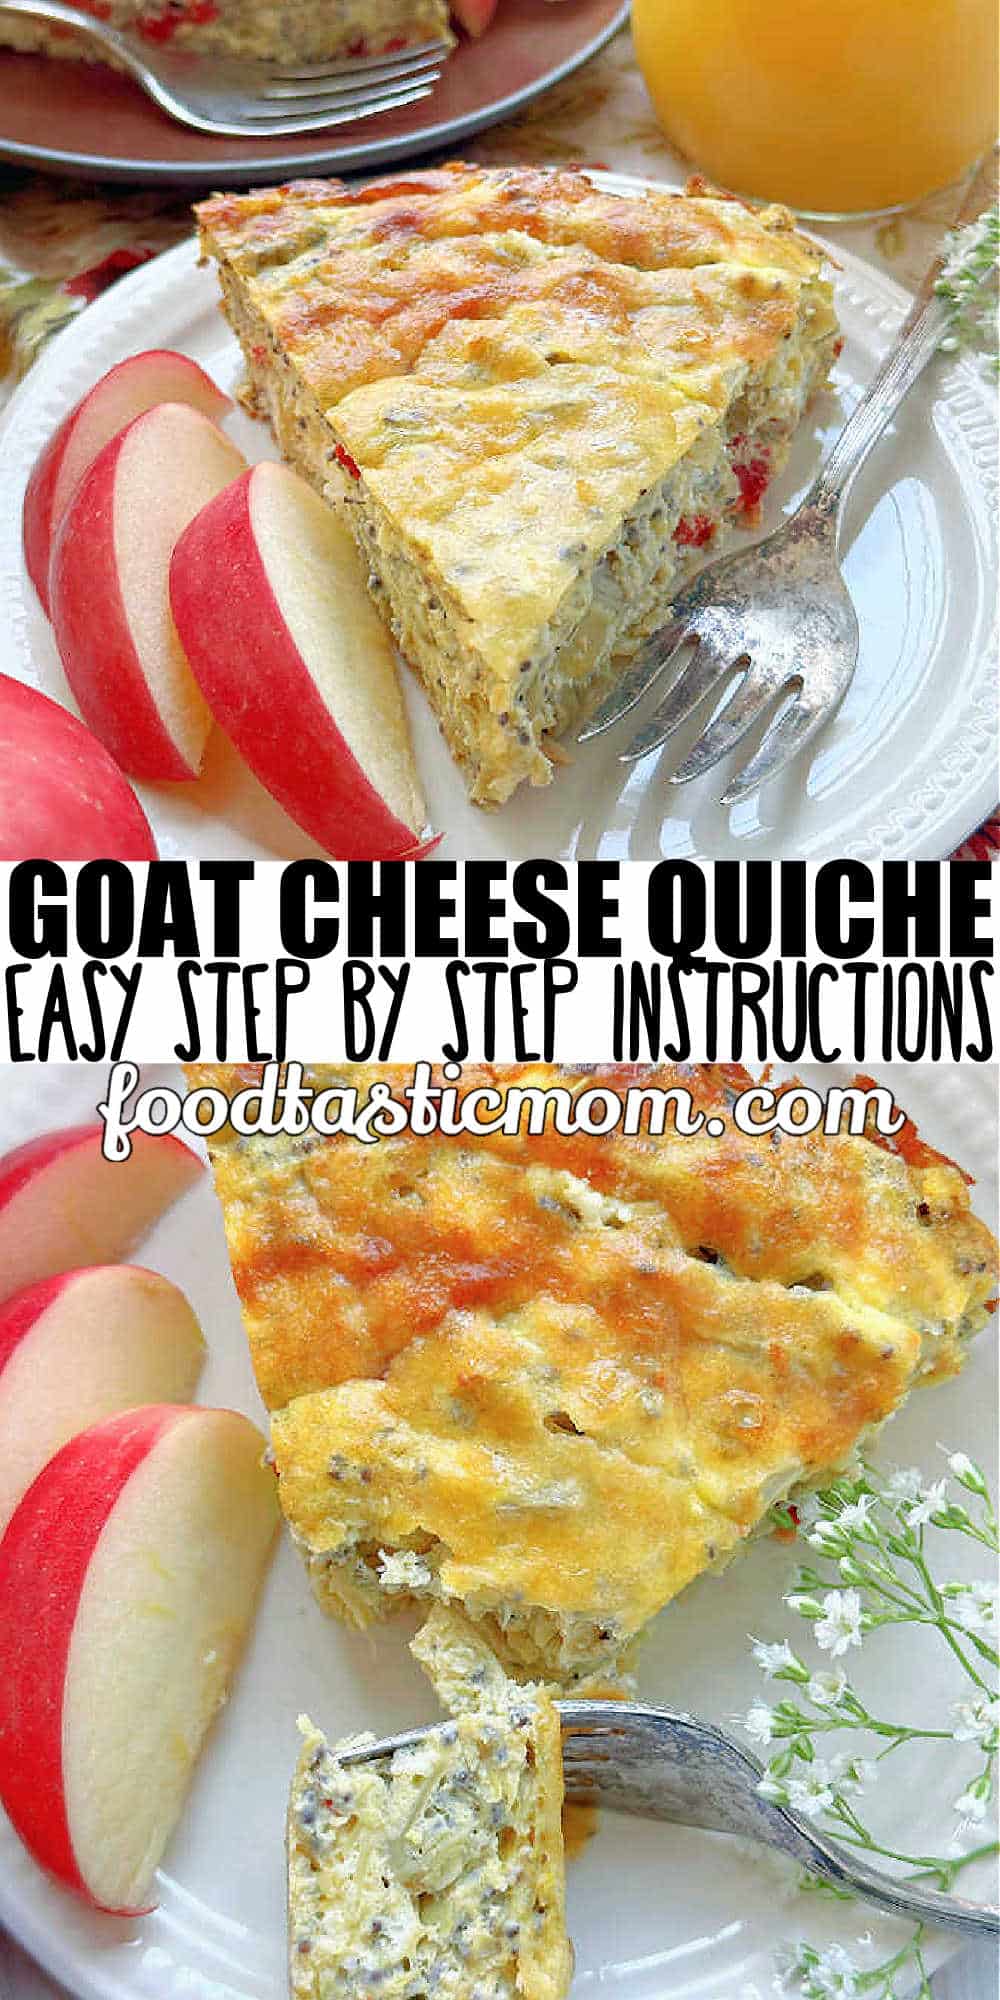 This Goat Cheese Quiche tastes indulgent but it's crustless! Artichoke hearts, roasted red peppers, goat cheese and a surprising ingredient combine for a really delicious quiche. via @foodtasticmom